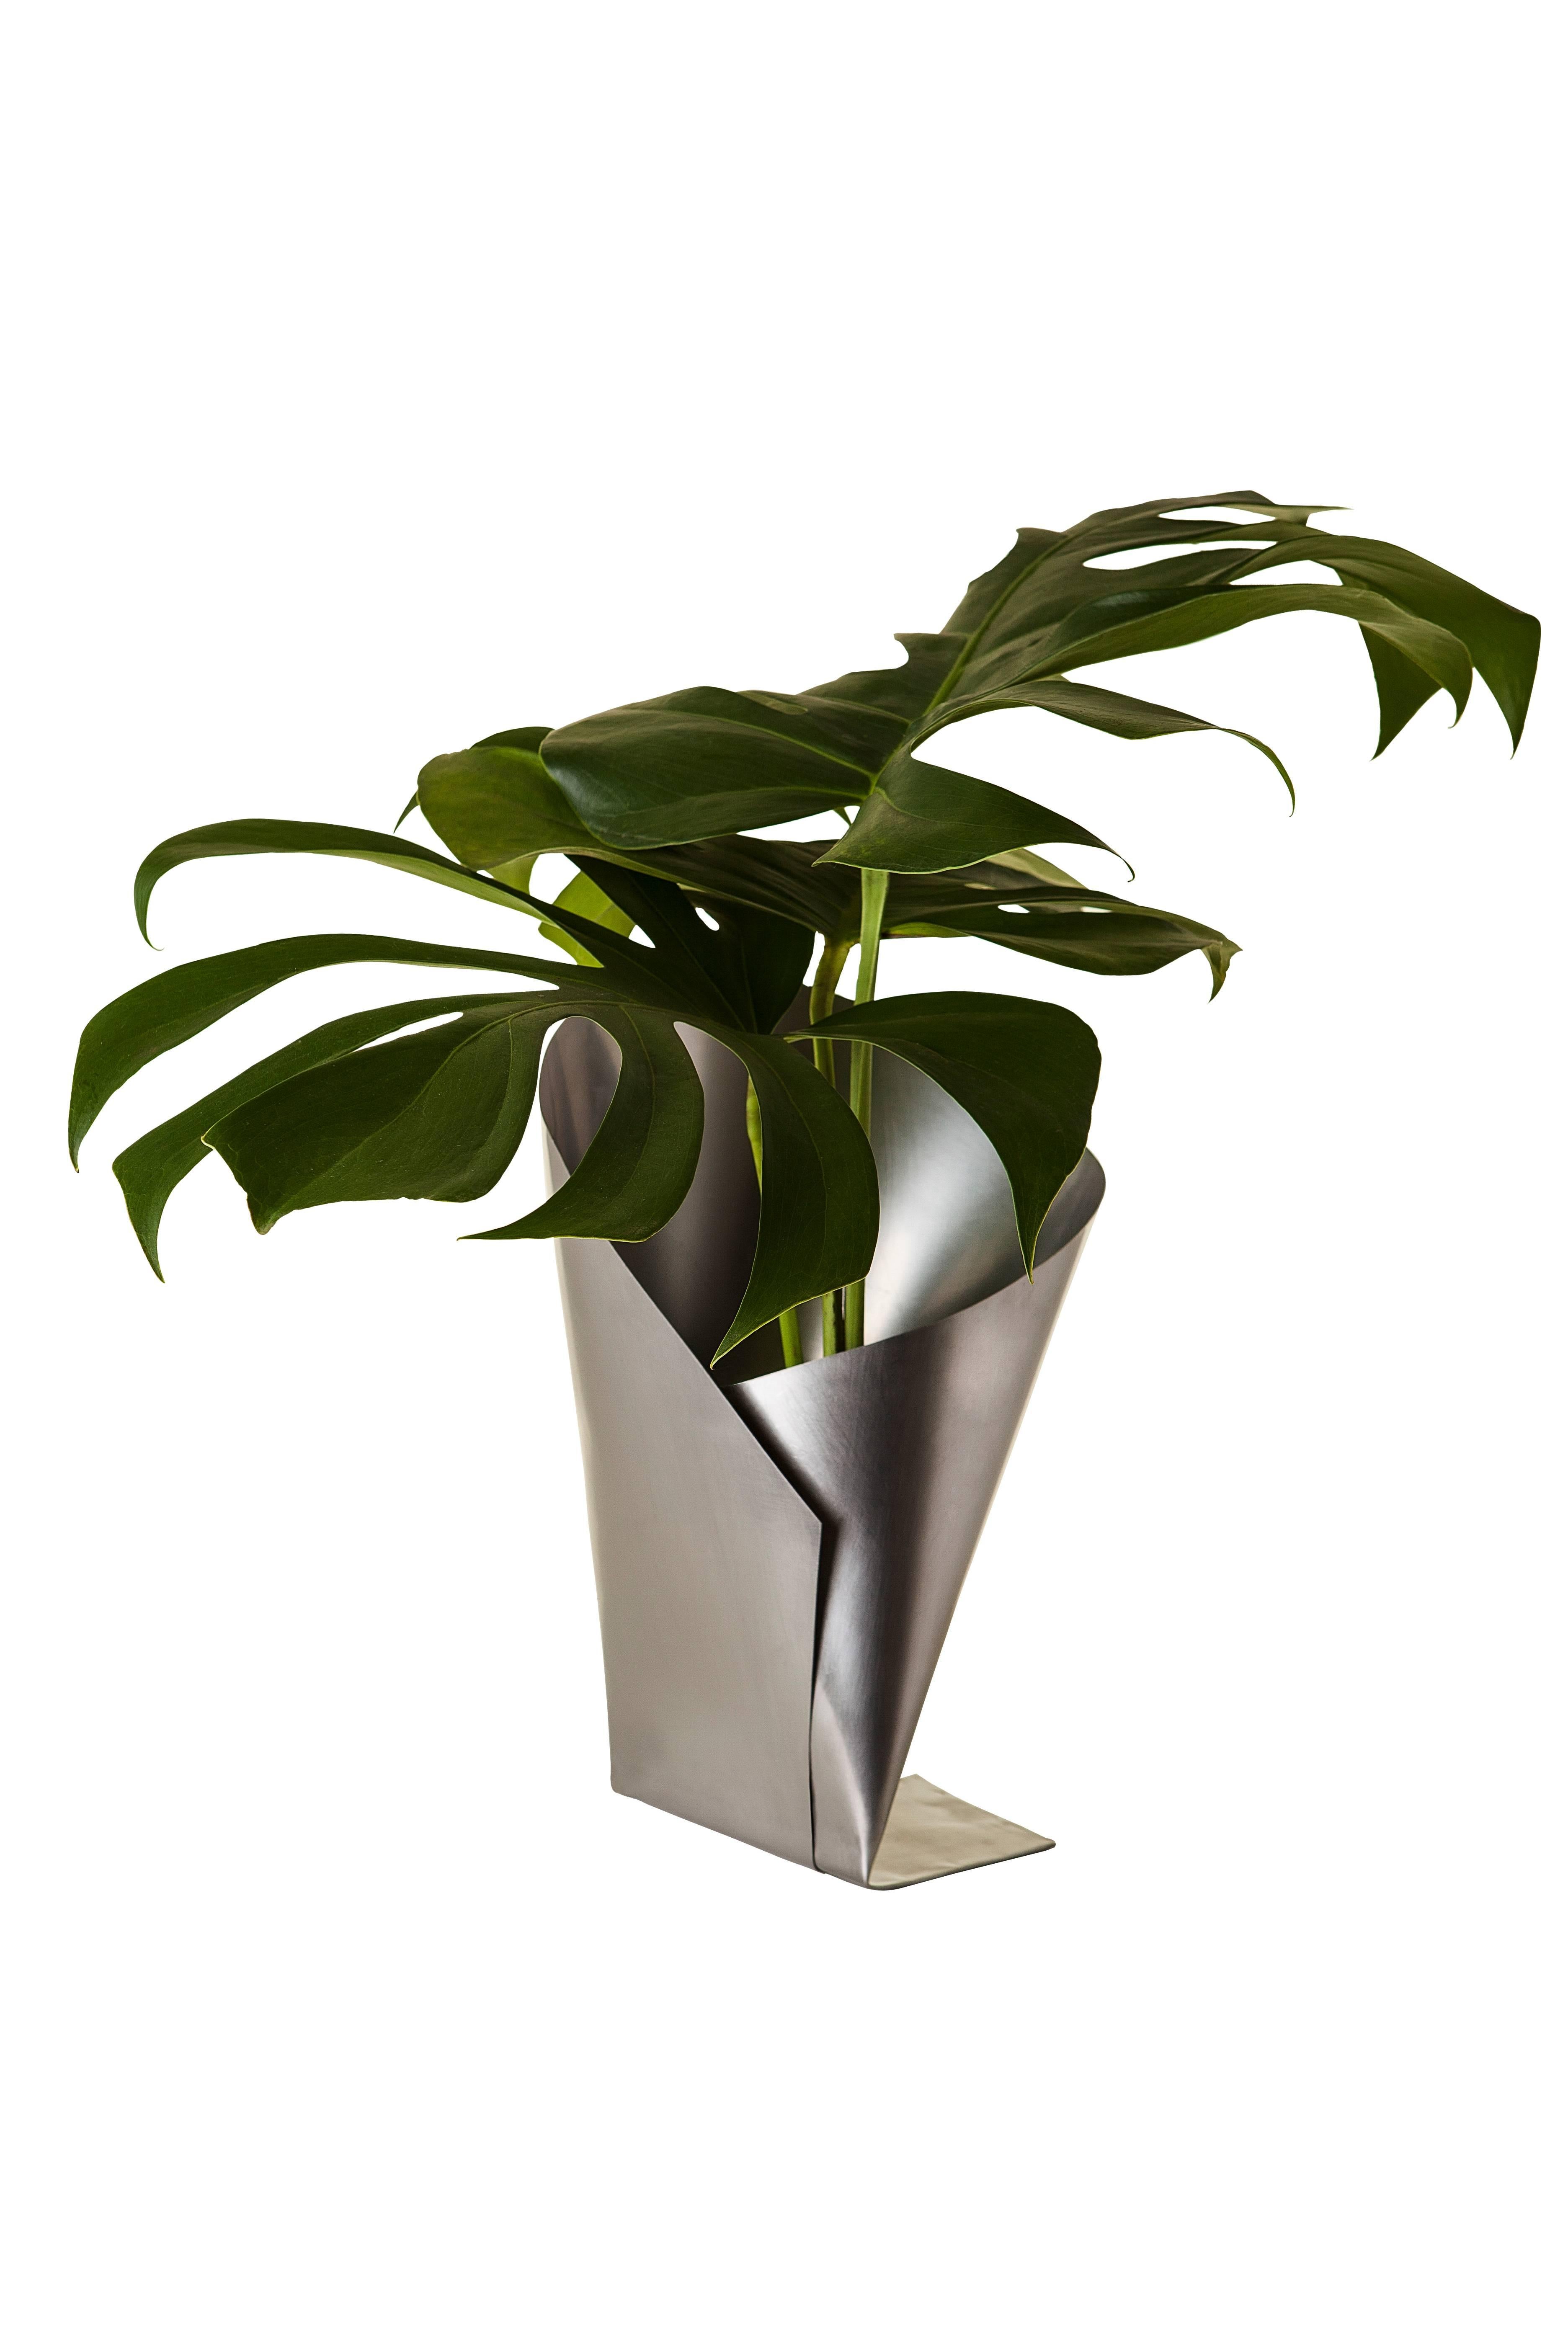 A gleaming stainless steel vase comes to life following years of material studies. The vase evolved out of an ongoing inquiry into the process of cutting and folding a single sheet of material, just like Origami. Simple without being simplistic, the